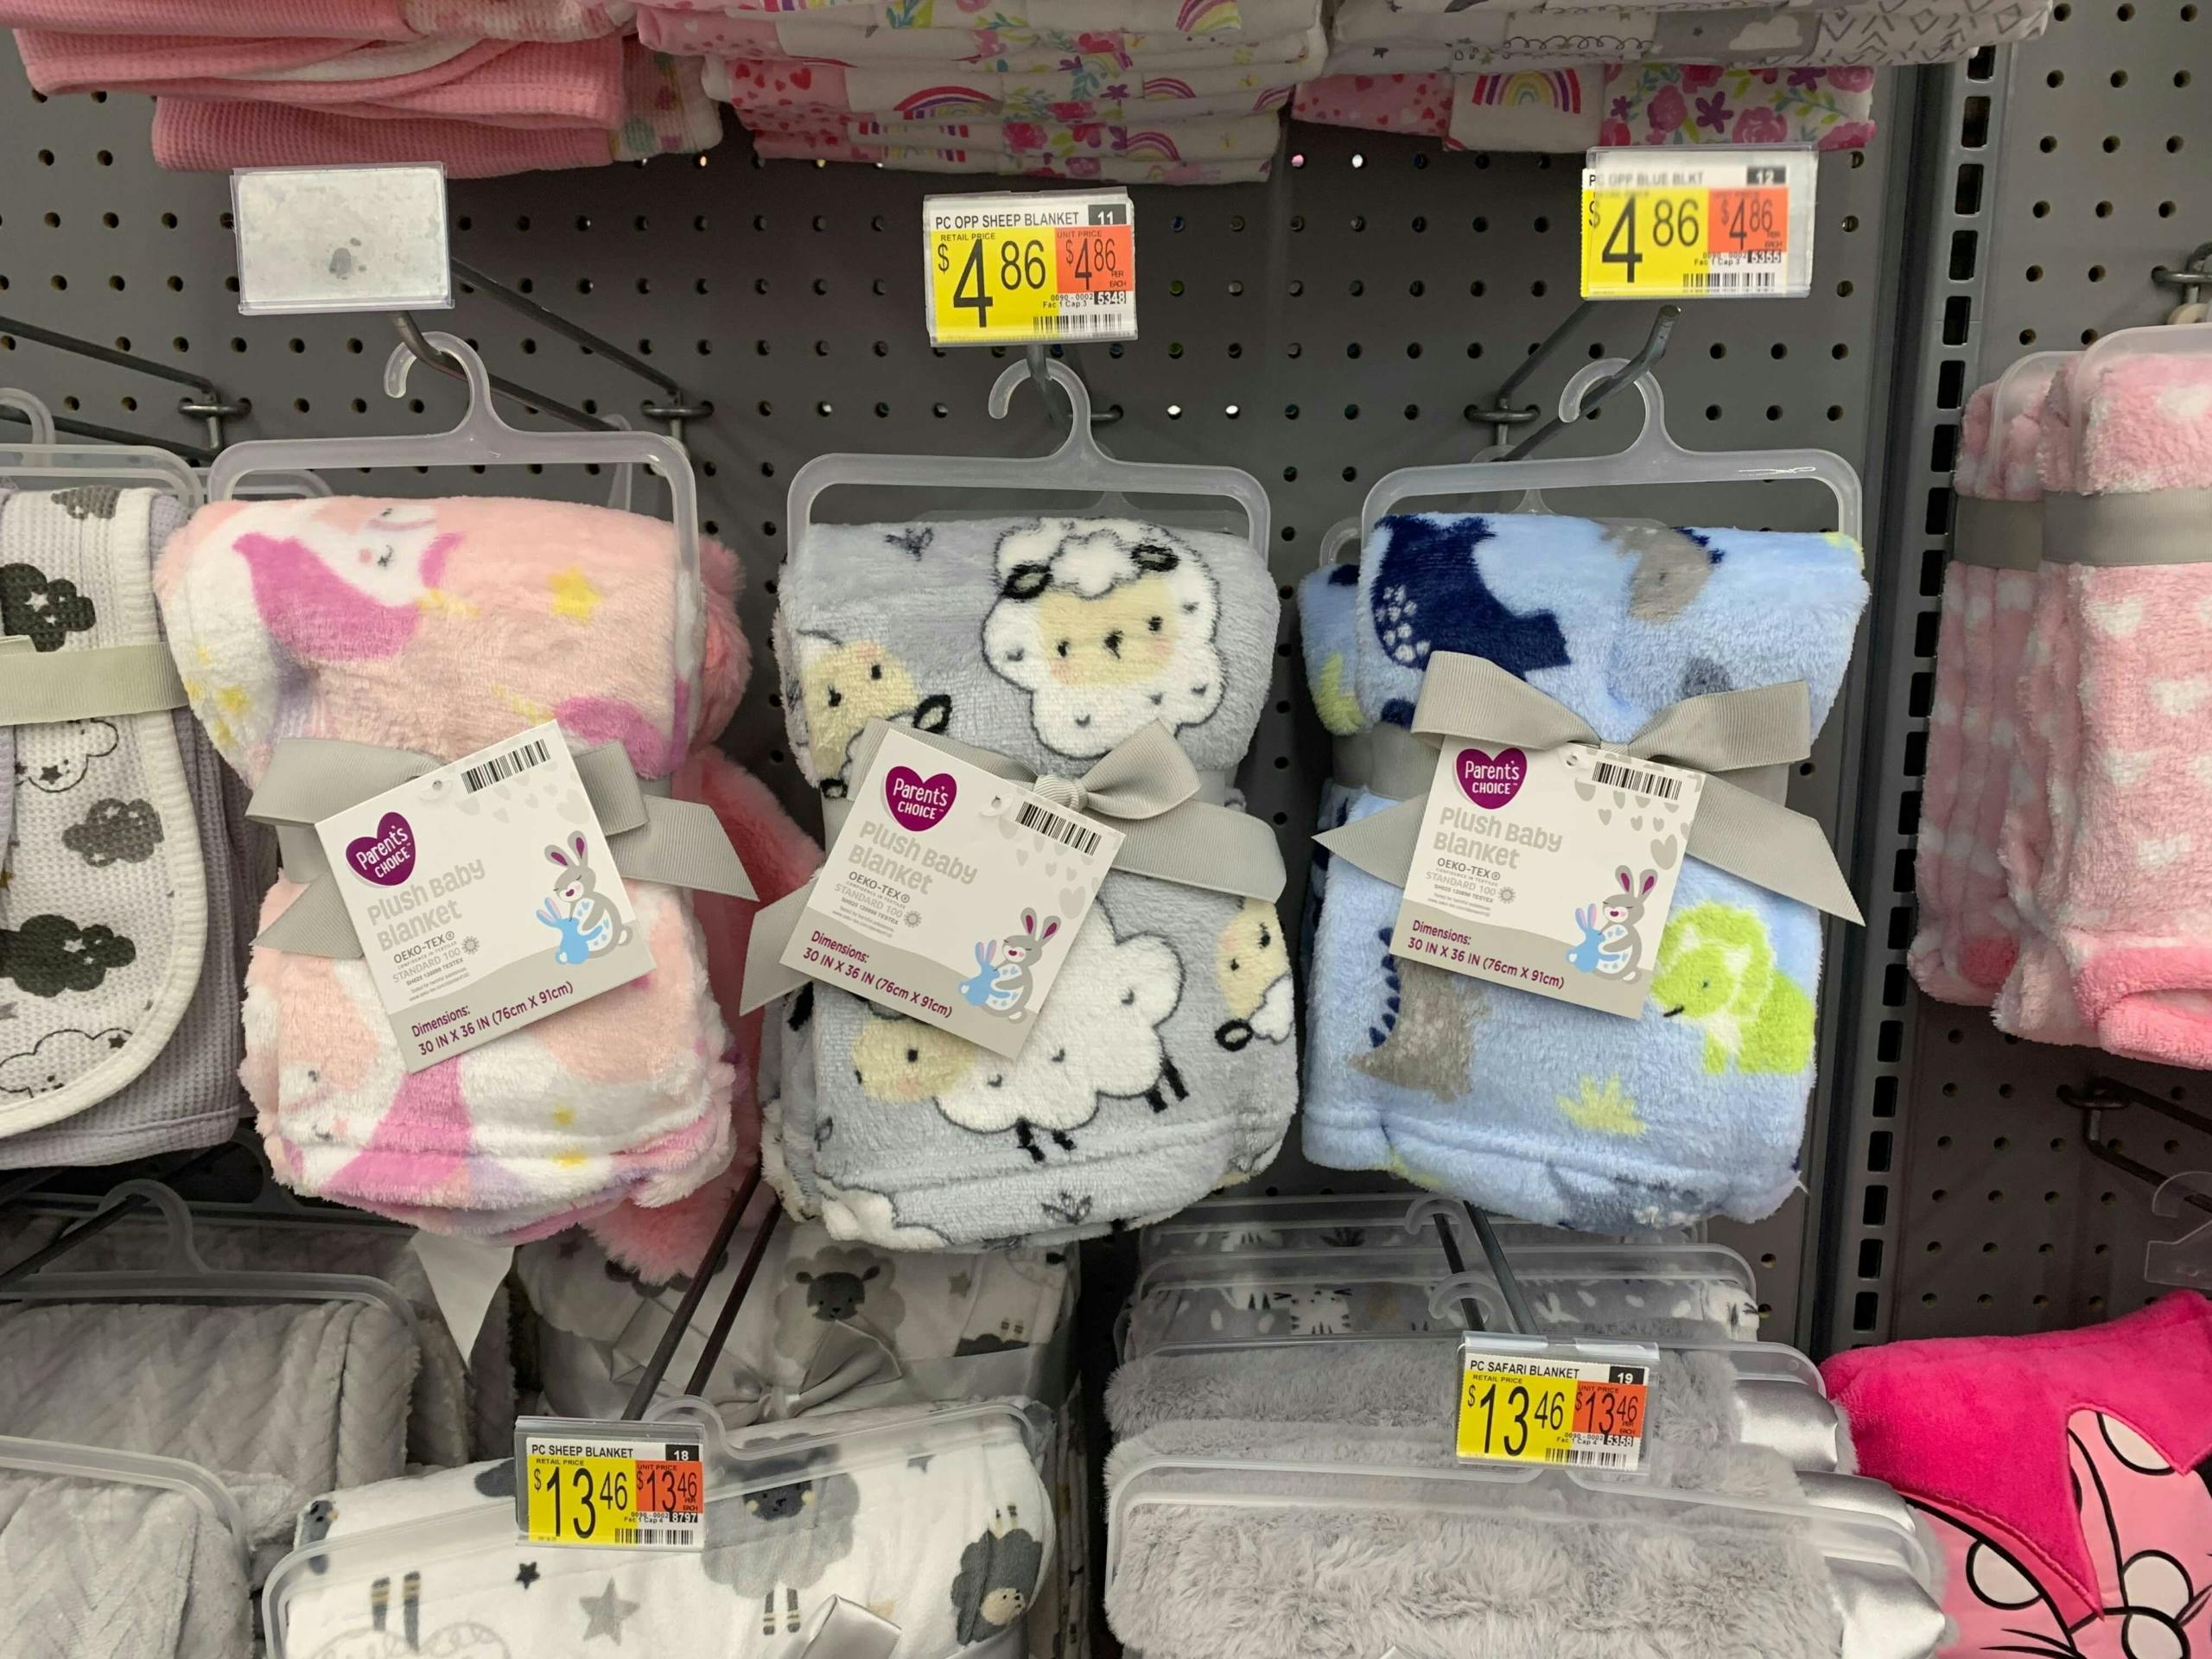 Https Thekrazycouponladycom 2021 02 11 Parents Choice Plush Baby Blankets Only 4 86 At Walmart 4007